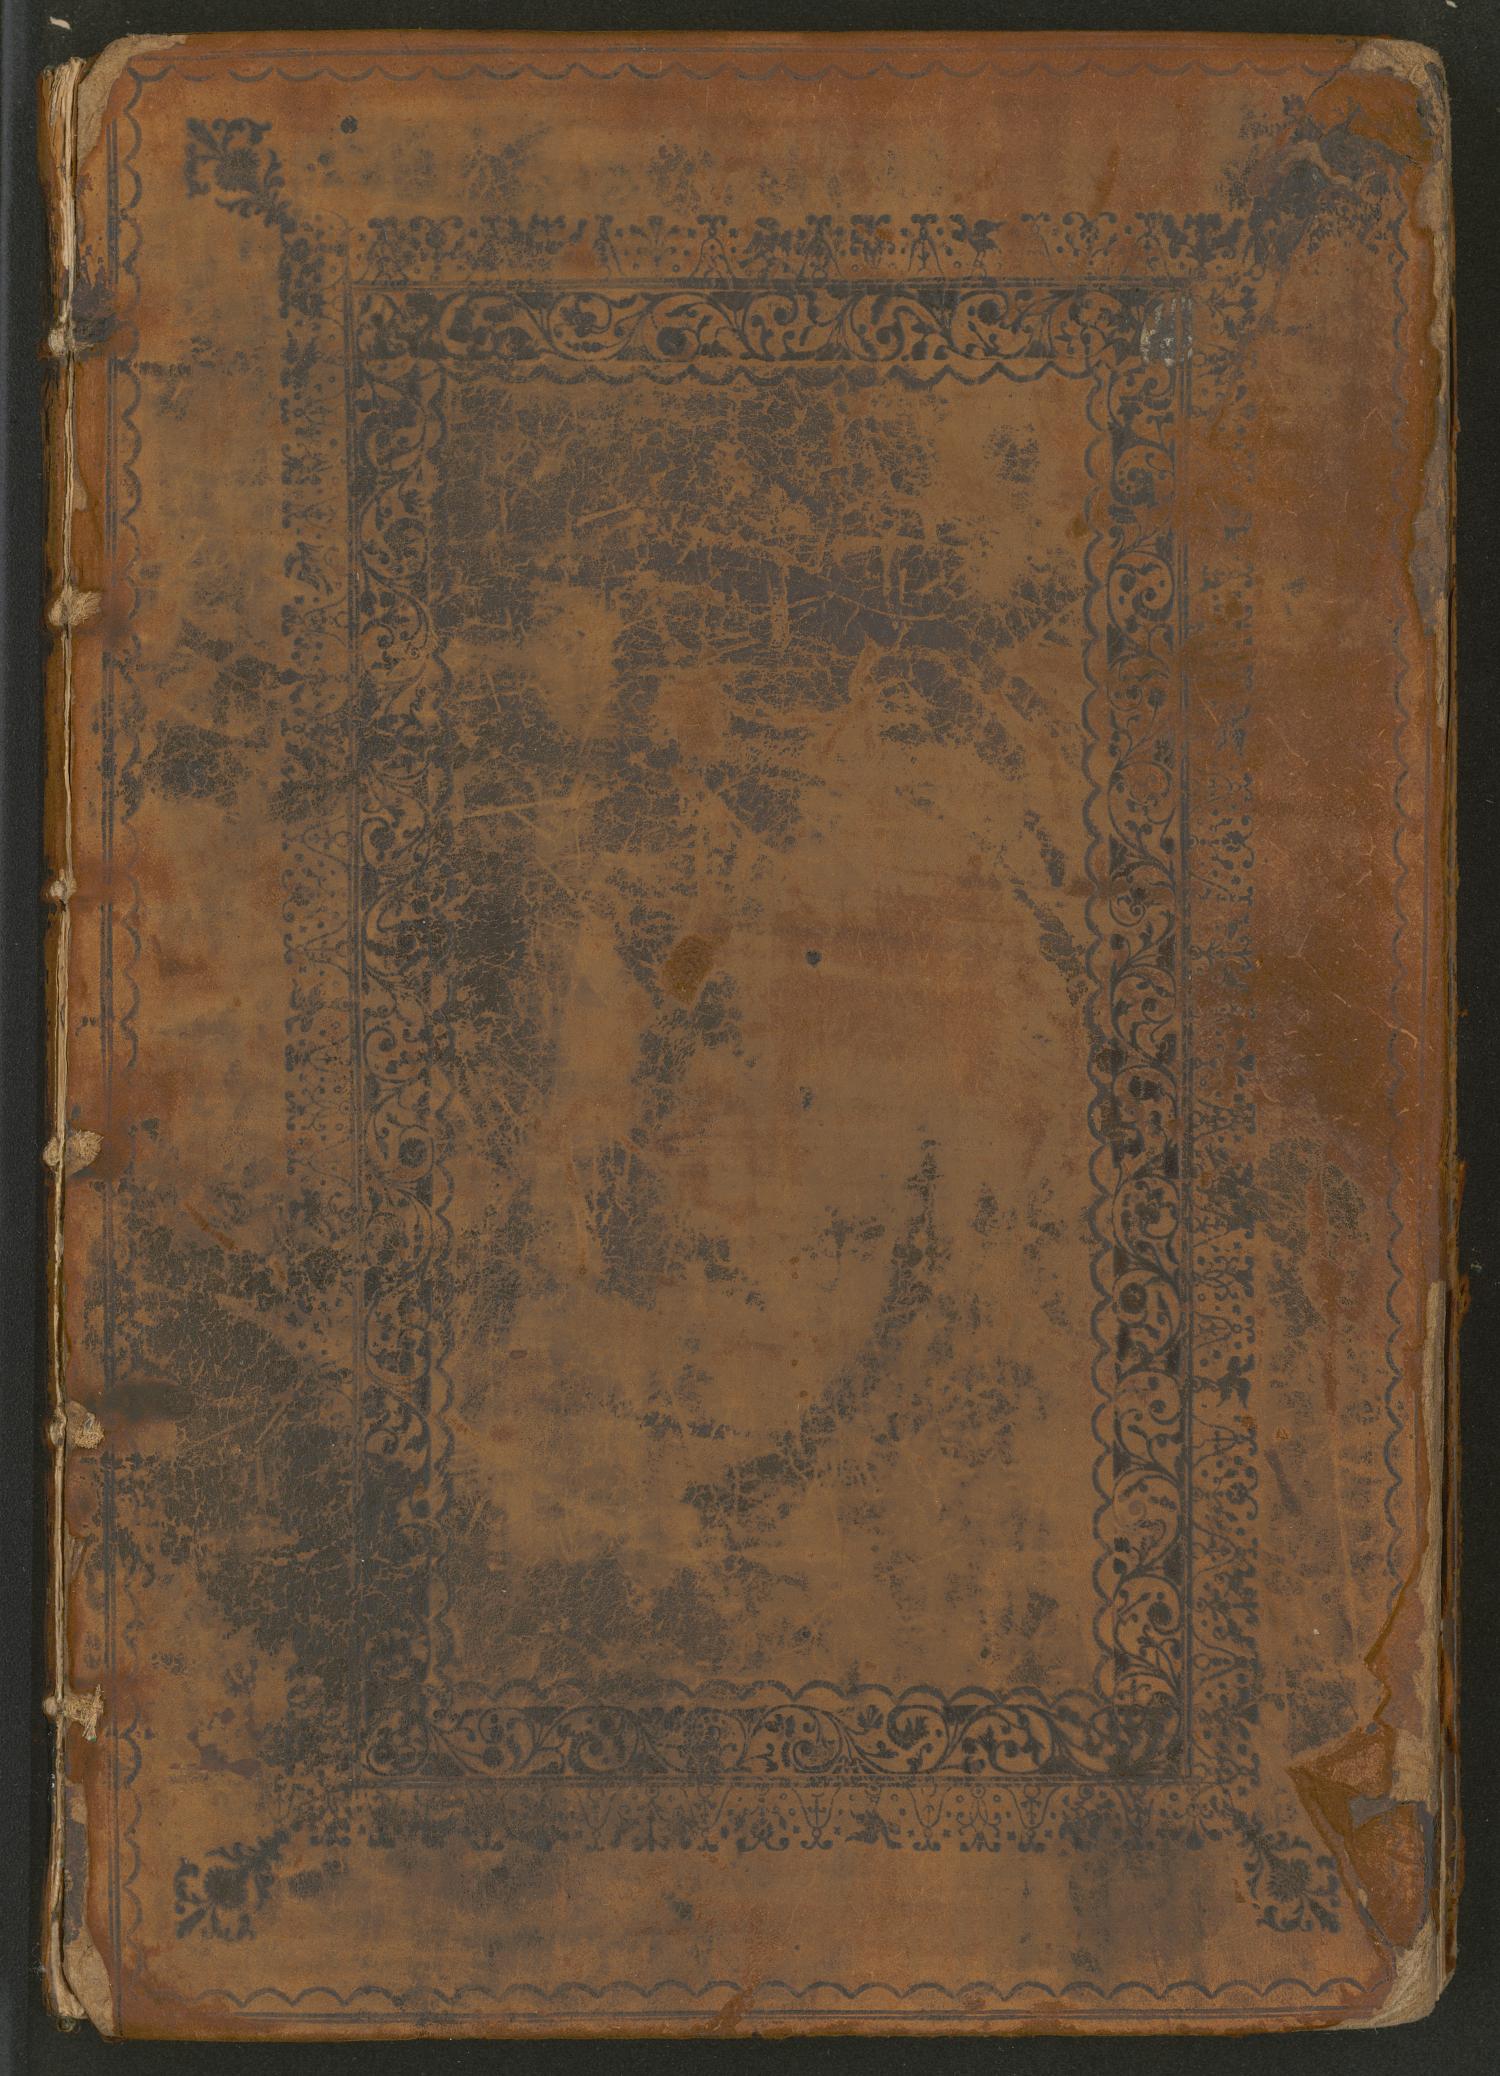 Booke of Common Prayer and The Whole book of Psalmes
                                                
                                                    Front Cover
                                                